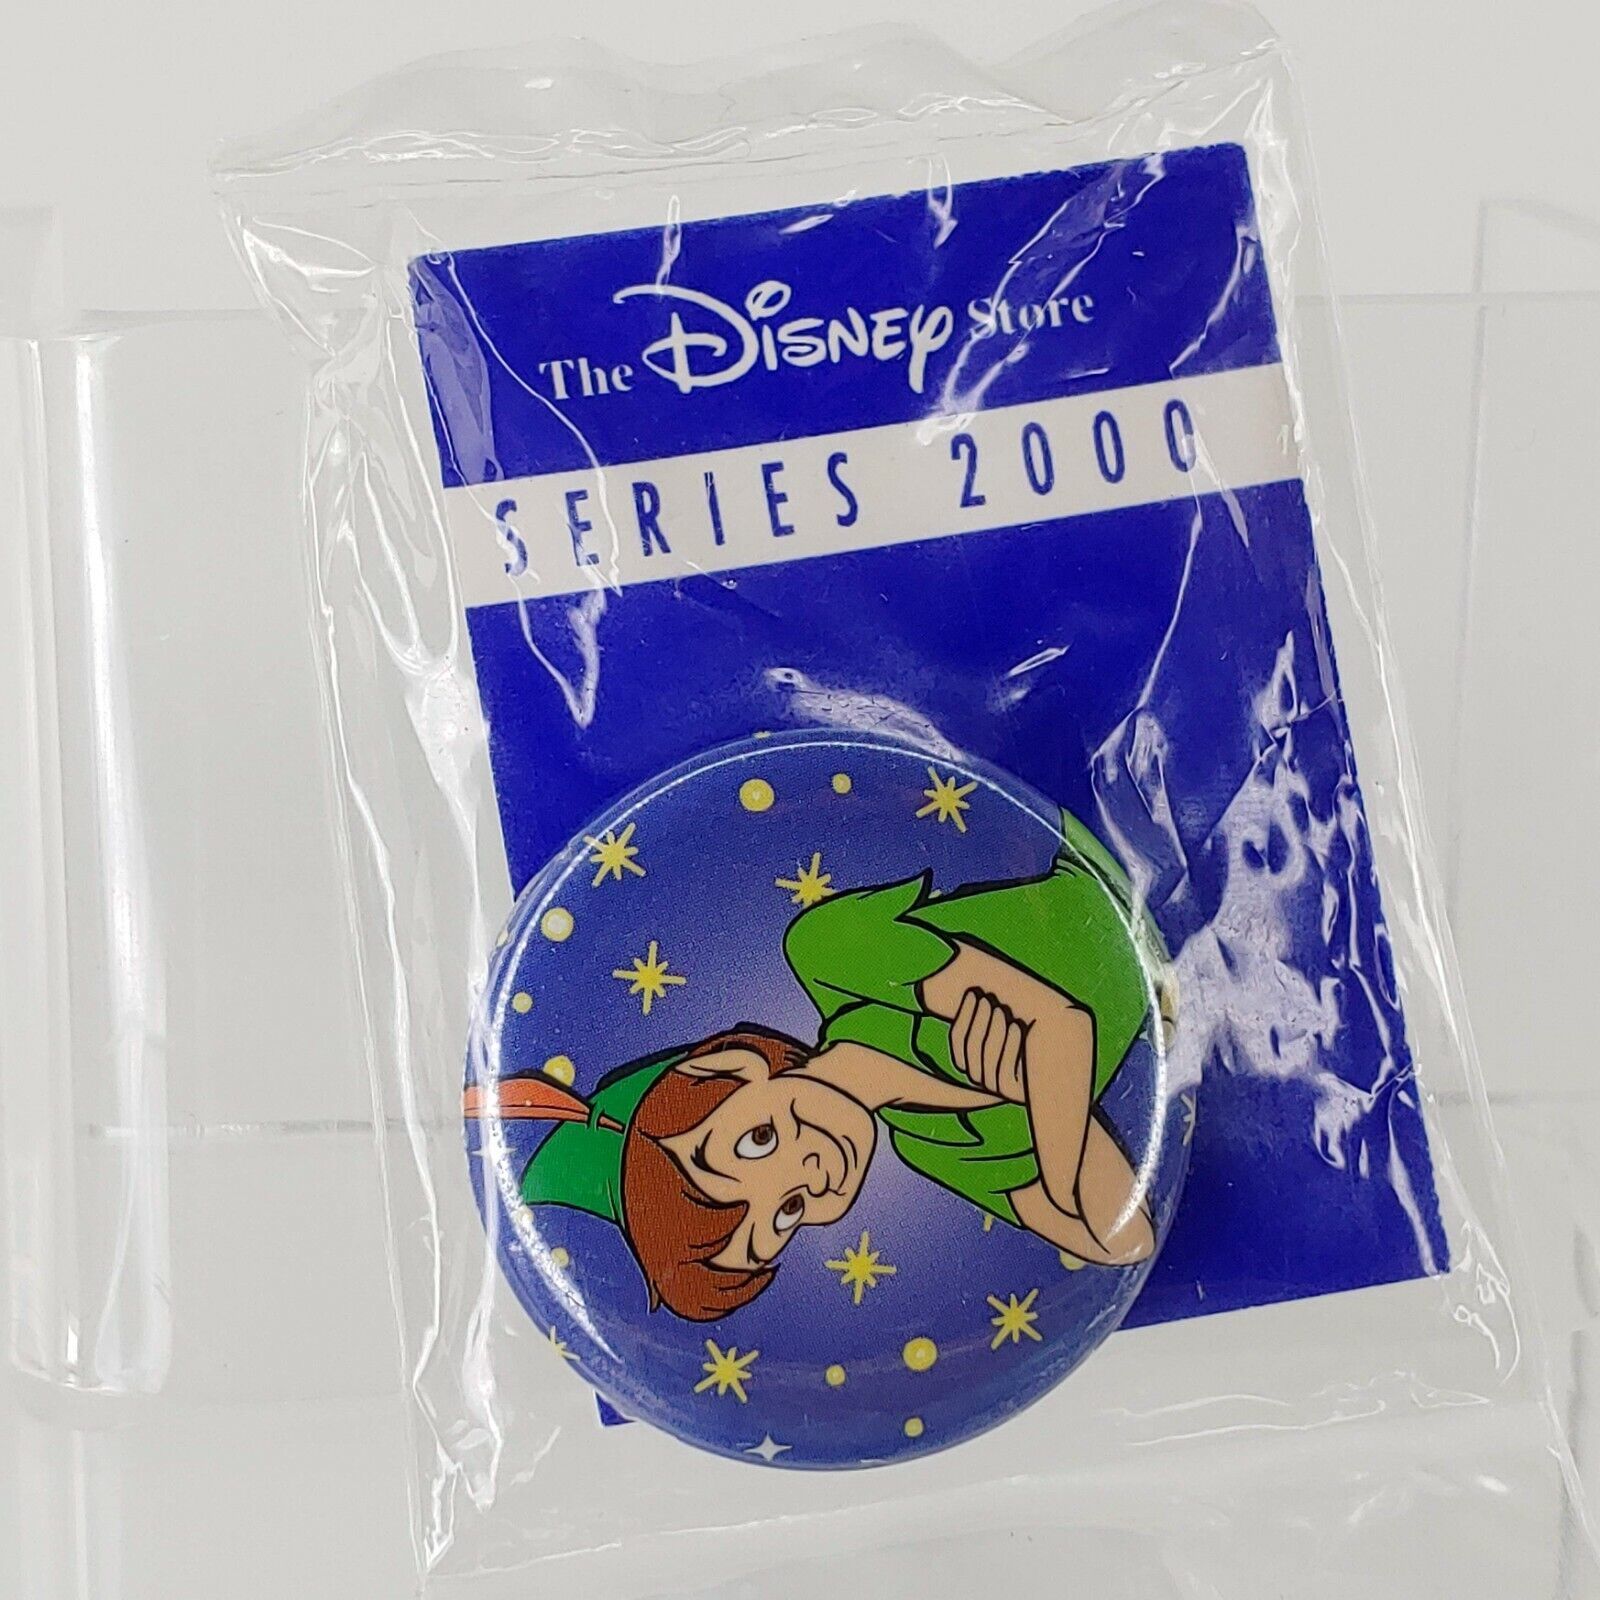 Primary image for The Disney Store Series 2000 round pin Peter Pan